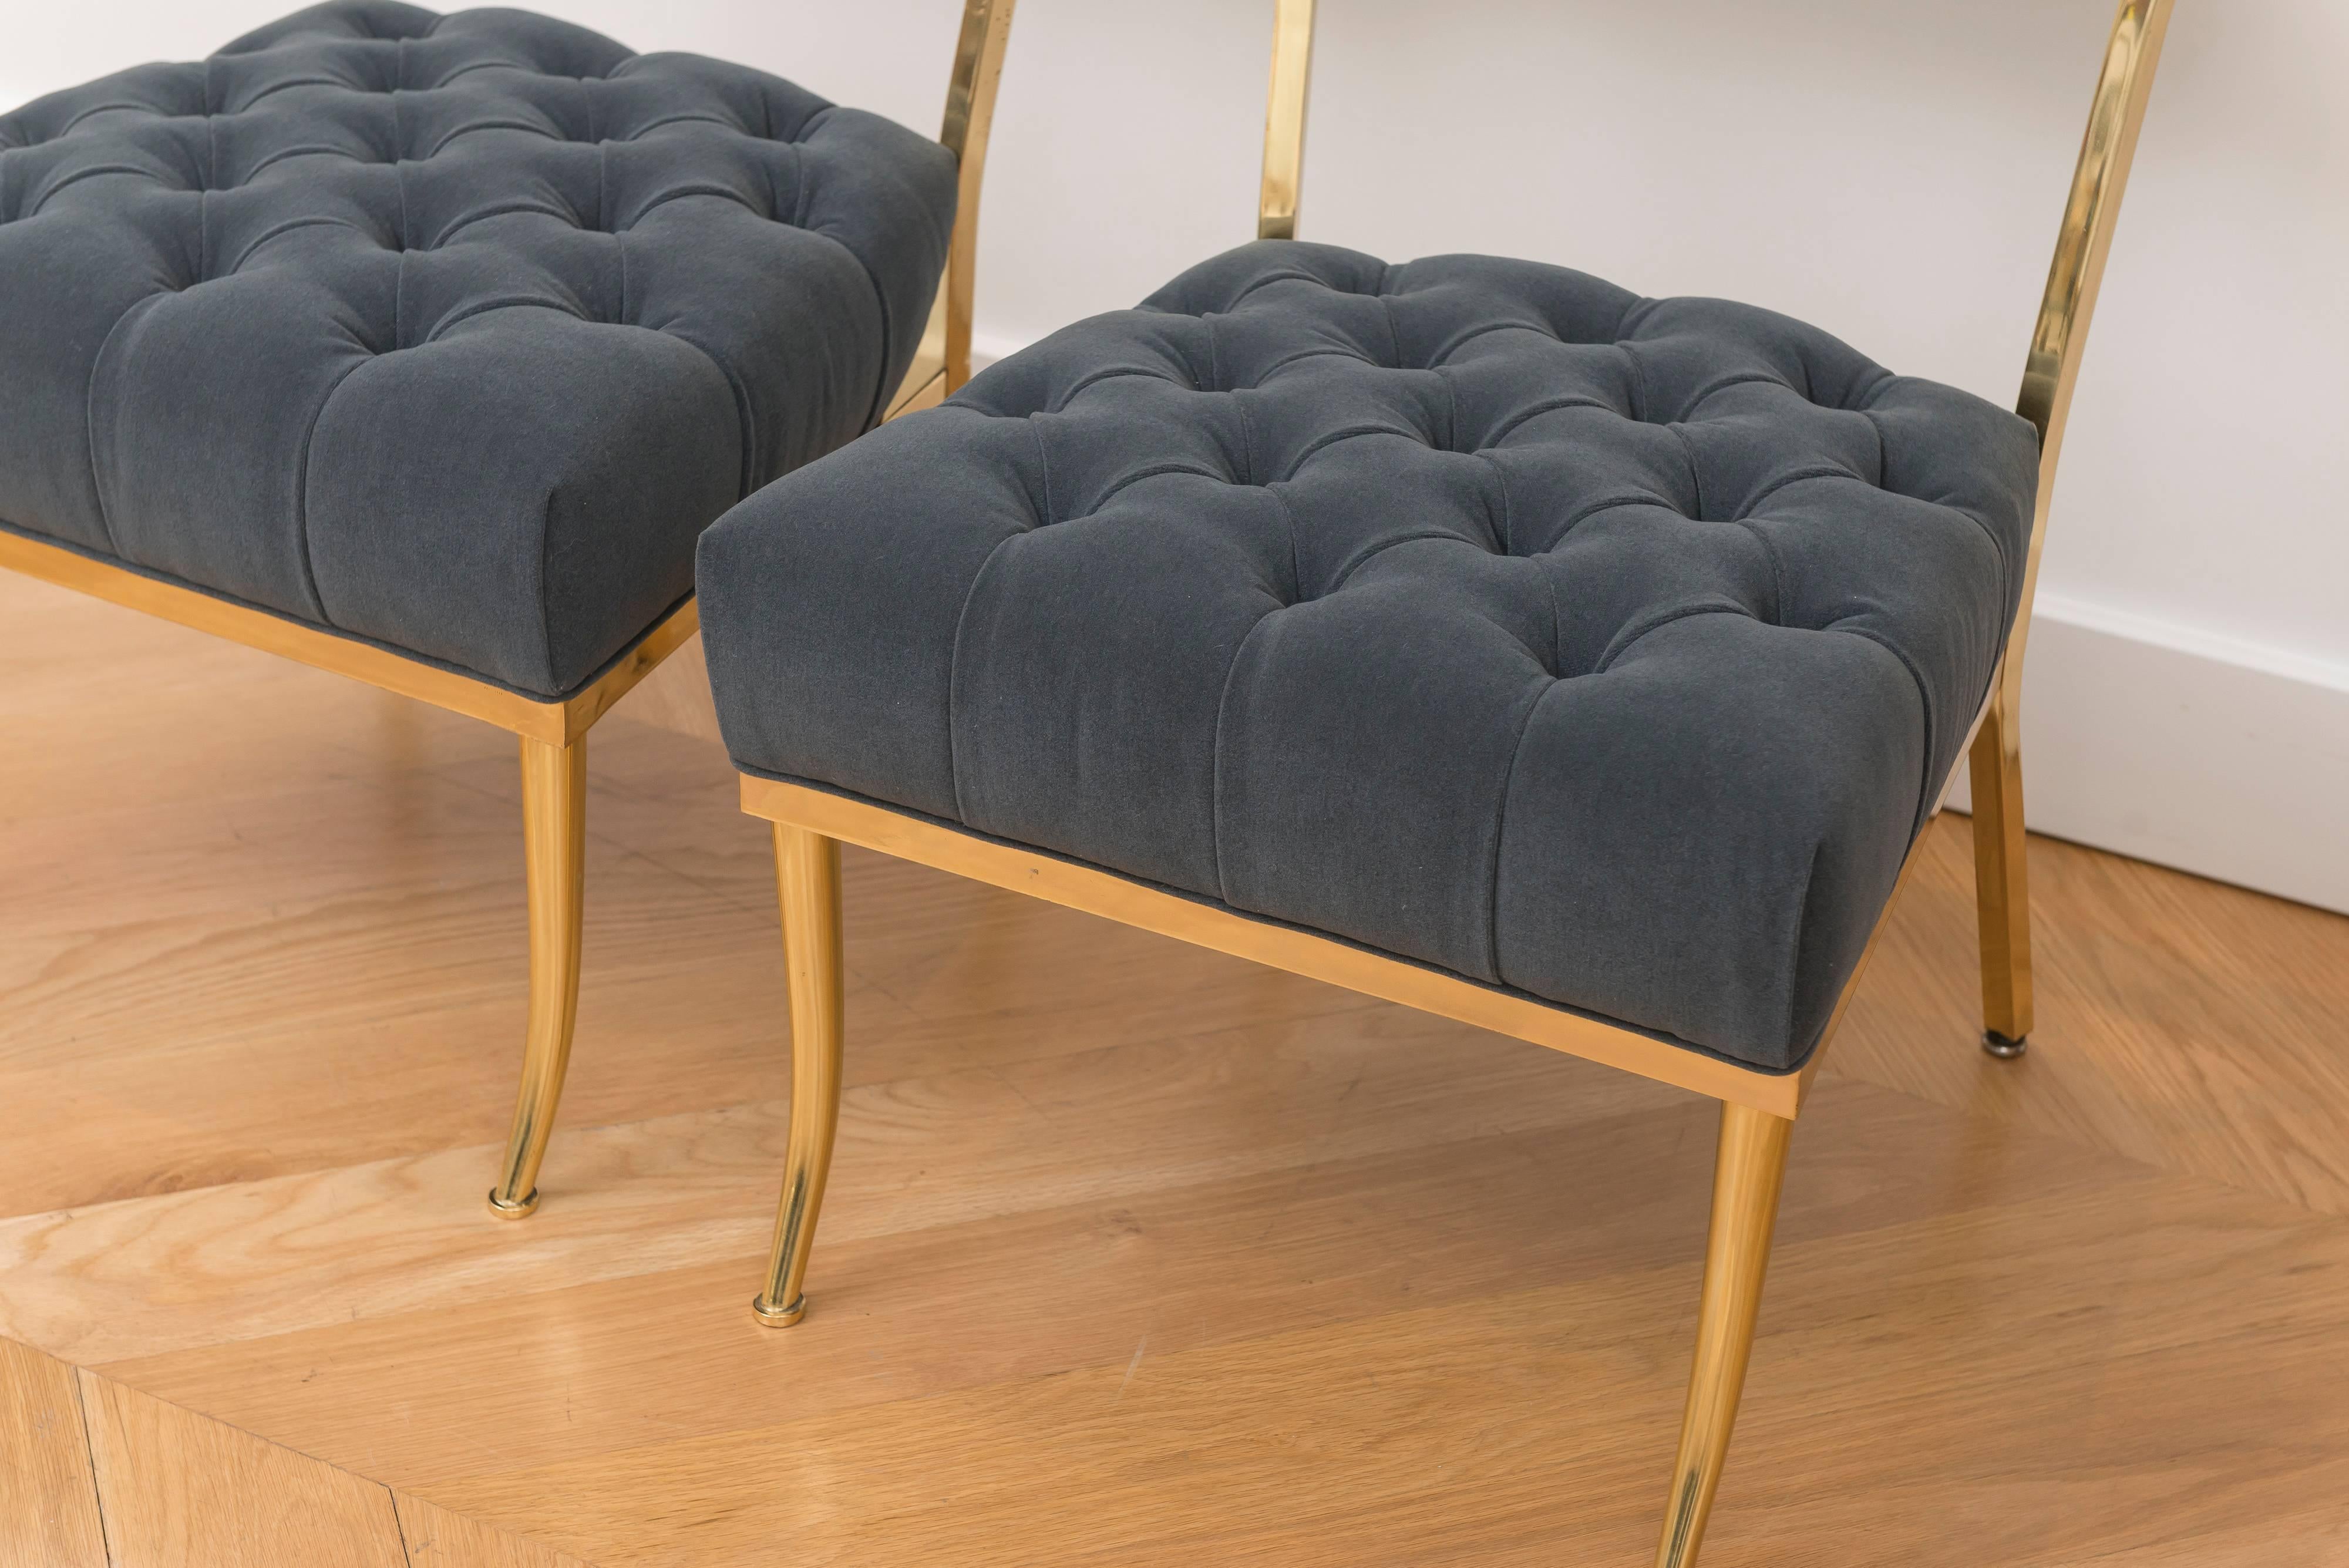 William Haines polished brass chairs with new wool velvet upholstery.